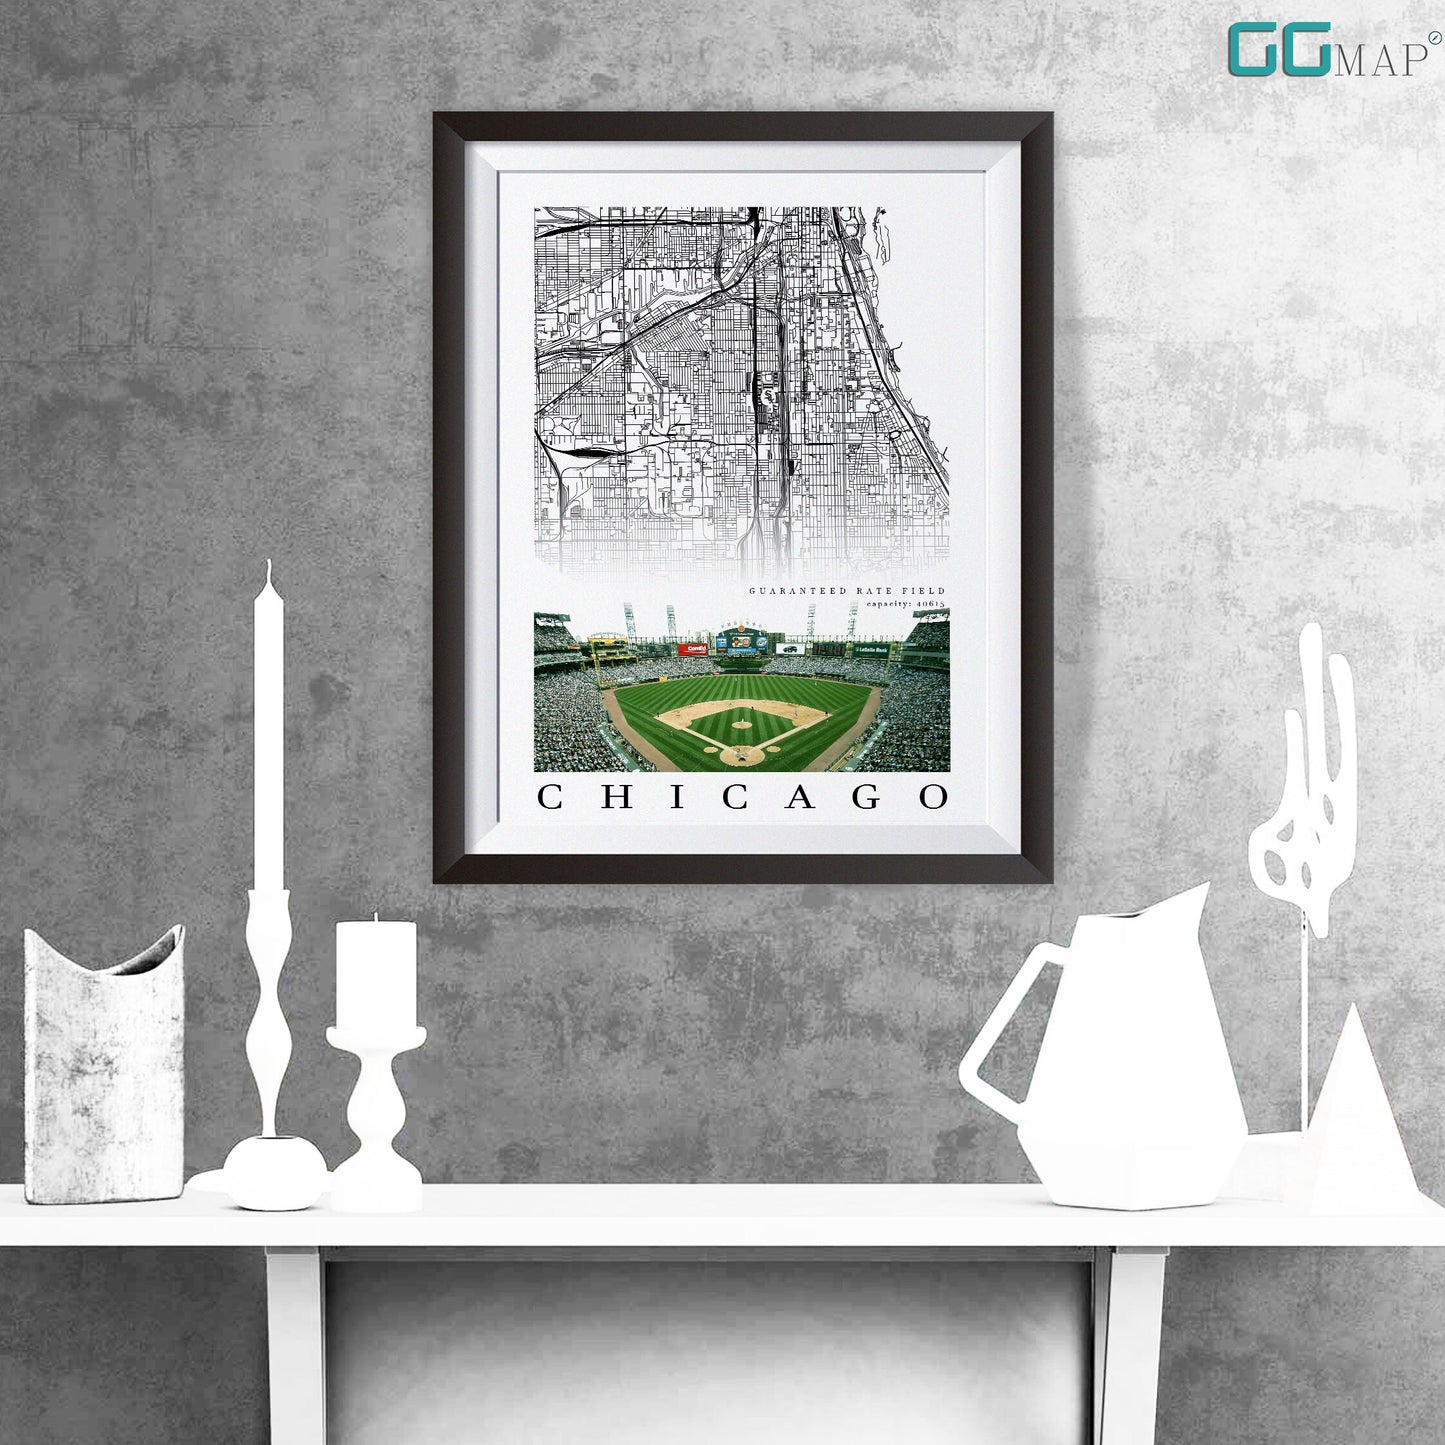 City map of CHICAGO - Guaranteed Rate Field - Home Decor Chicago - Guaranteed Rate Field wall decor - Print map - Chicago White Sox